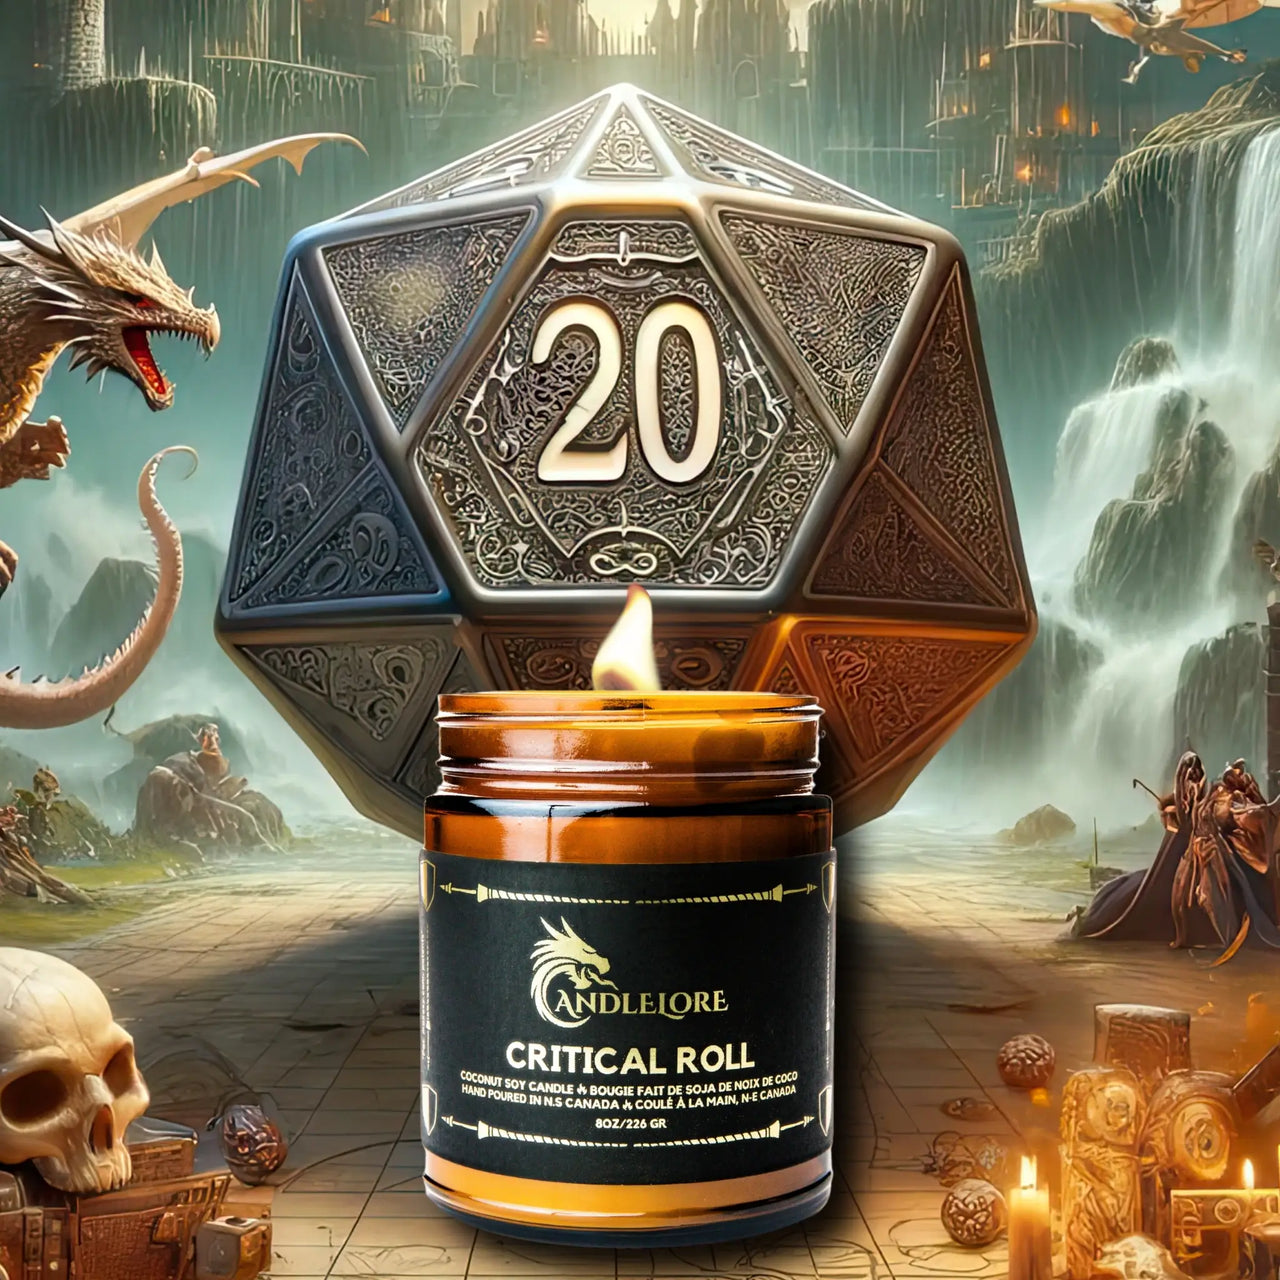 Crtical Roll Candle with a d20 behind it